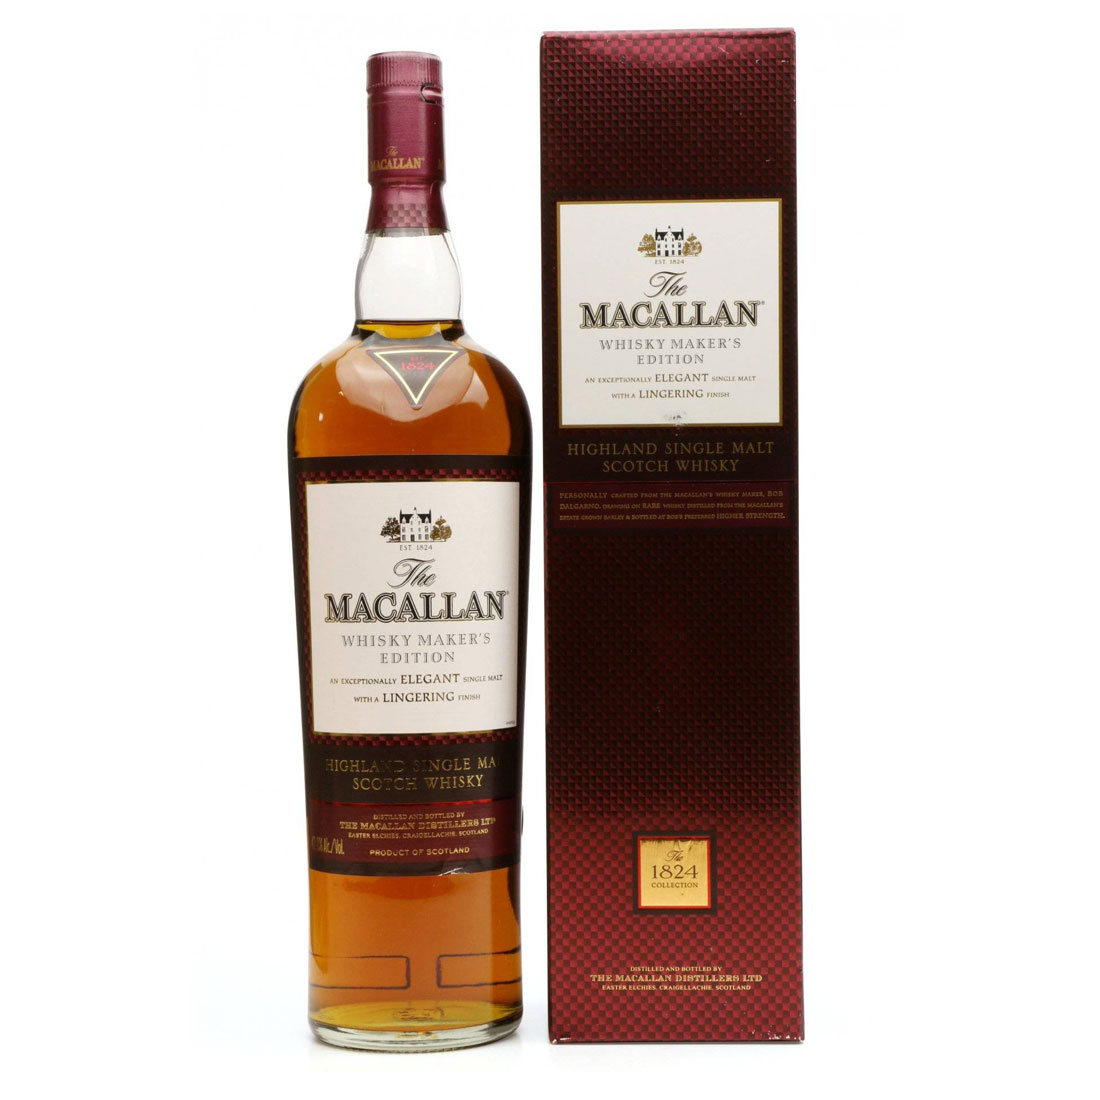 LB_Bottle-The-Macallan-Whisky-Maker-Edition---The-1824-Collection-(1-Litre)